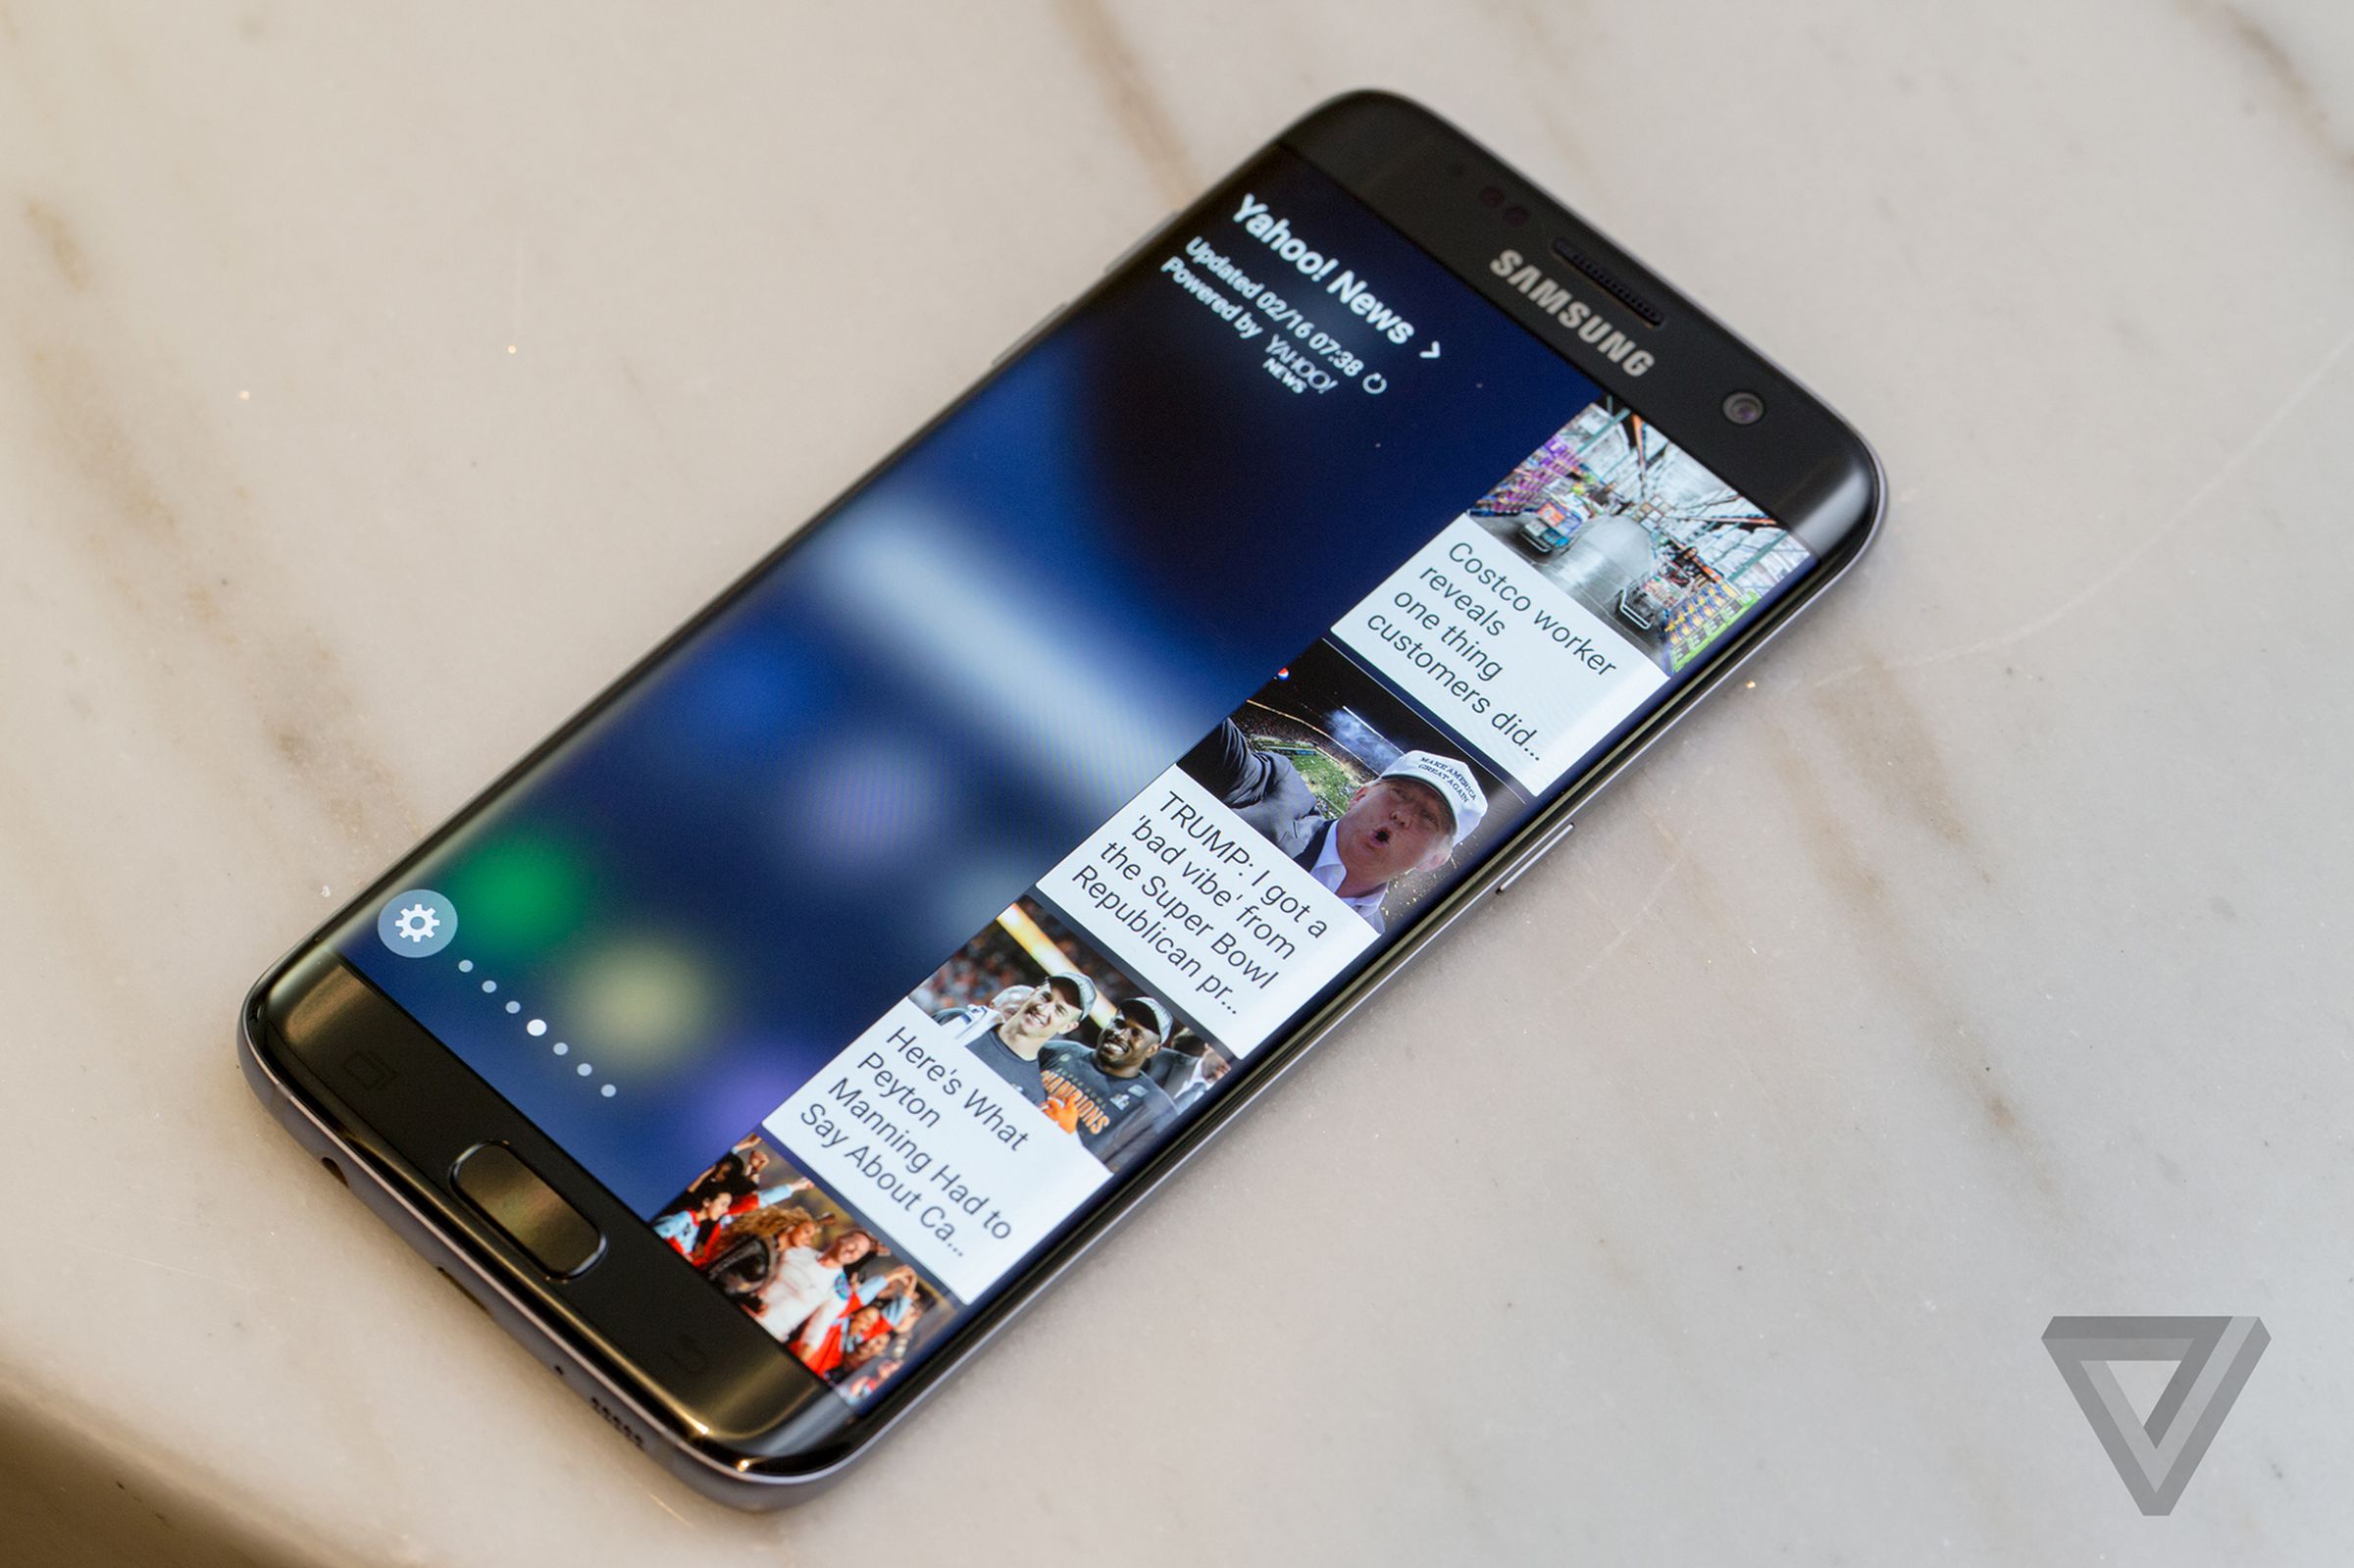 Samsung Galaxy S7 and S7 Edge pictures